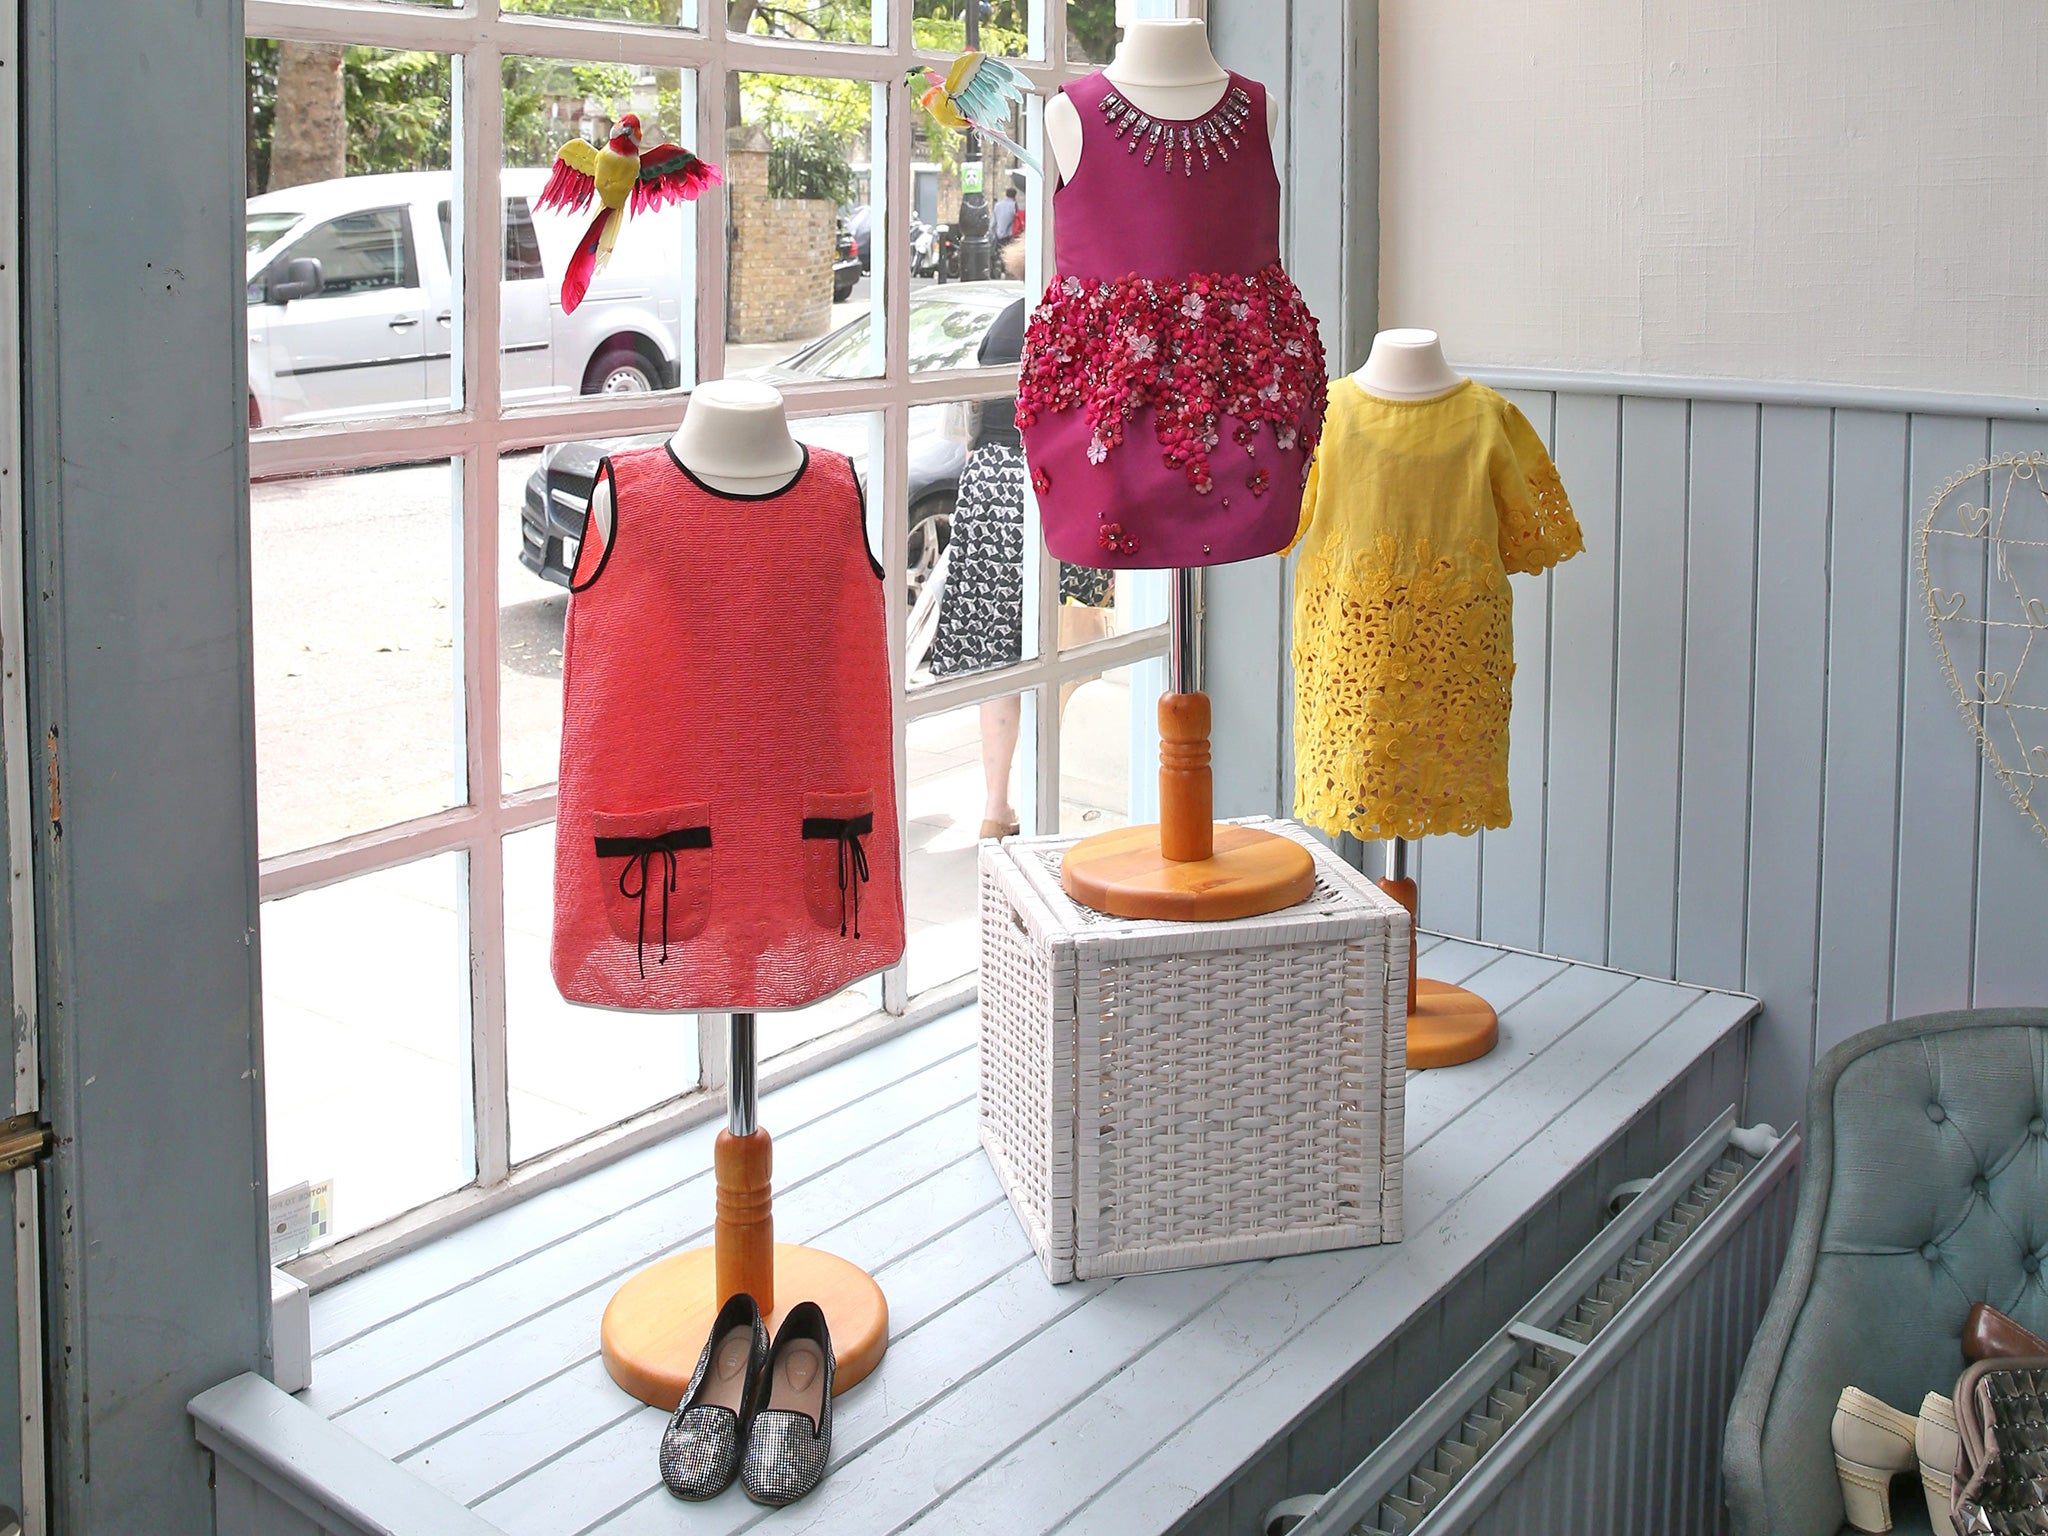 Harper Beckham's bright outfits available for sale at Mary’s Living & Giving Shop in aid of Save The Children